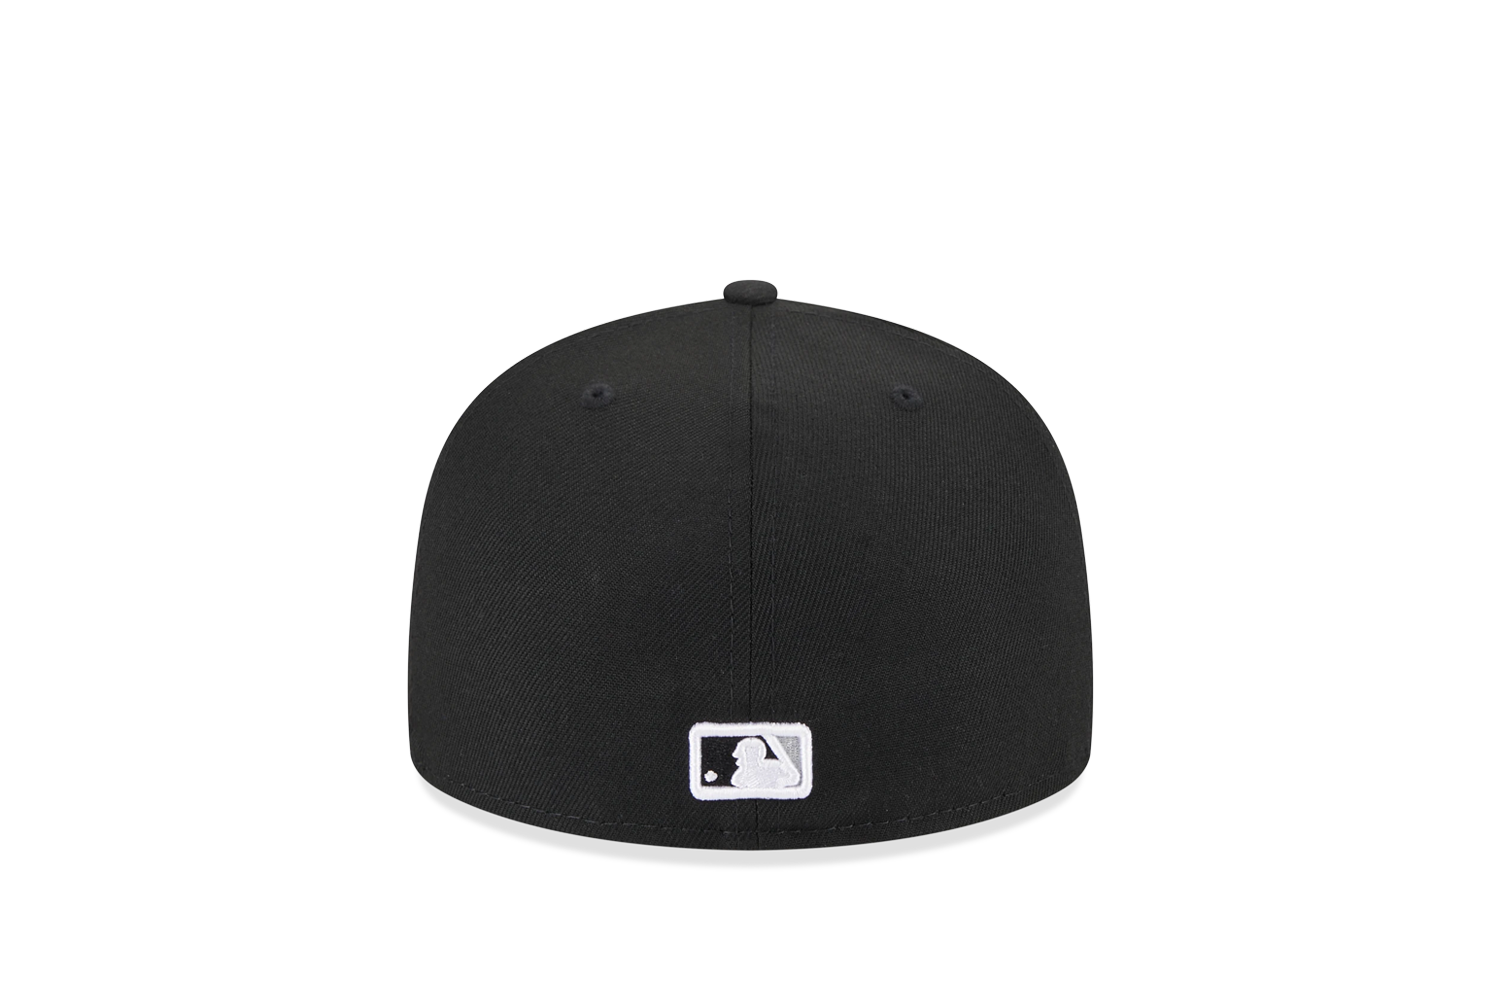 CHICAGO WHITE SOX 59FIFTY FITTED CAP